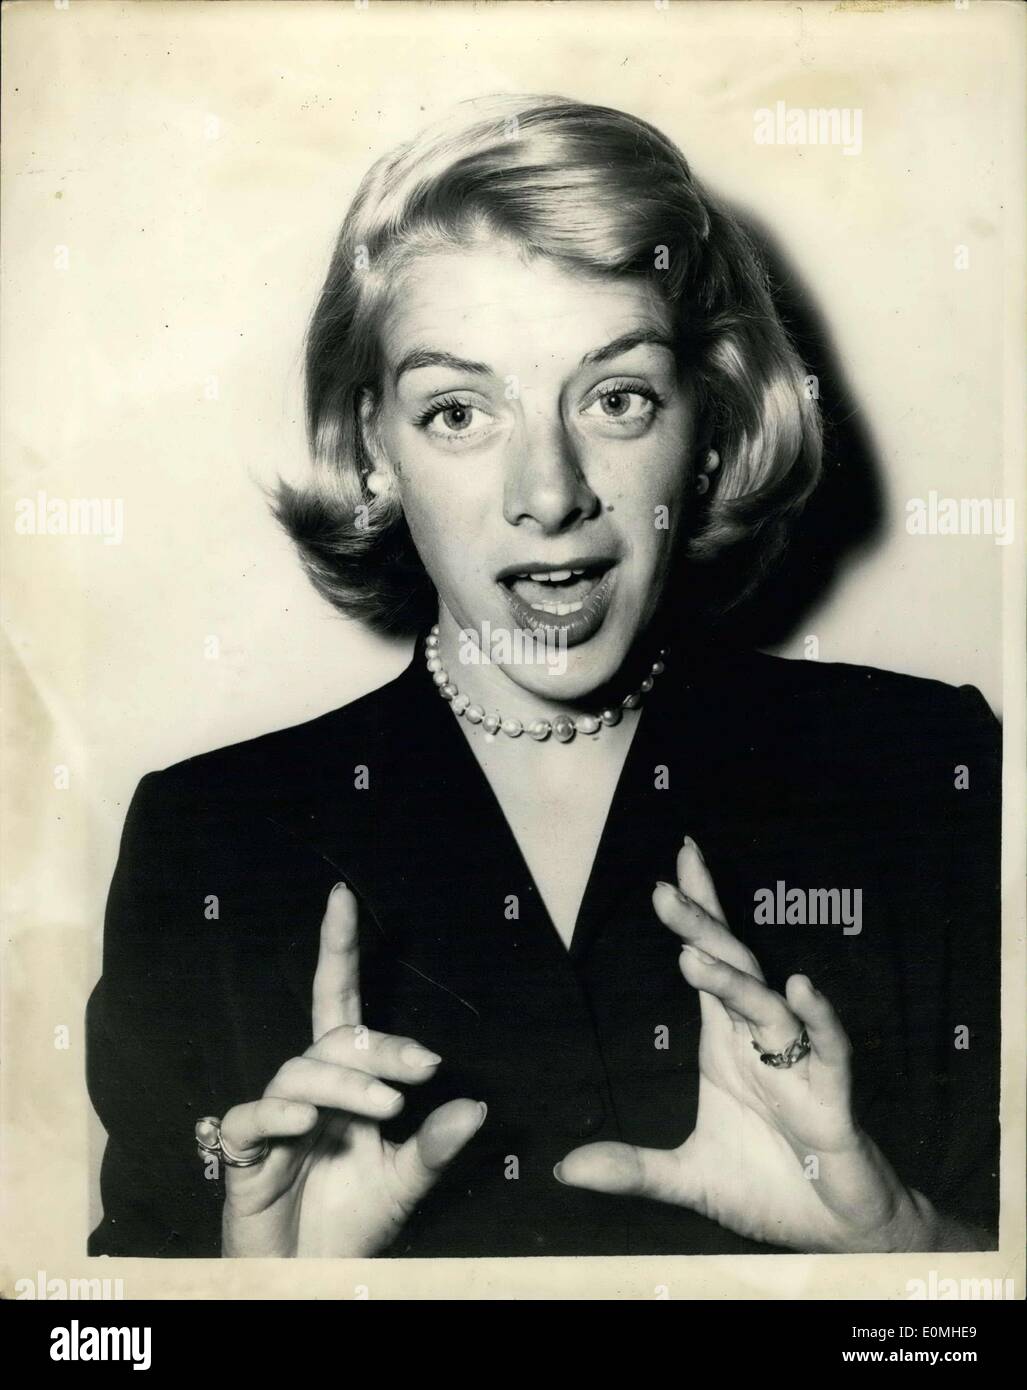 Jul. 11, 1955 - Press Reception For Rosemary Clooney. Photo shows The famous American singing star, Rosemary Clooney, who begins a two-weeks season at the London Palladium next Monday - seen singing a song at this afternoon's Press Reception at The Prince of Wales Theatre. Stock Photo